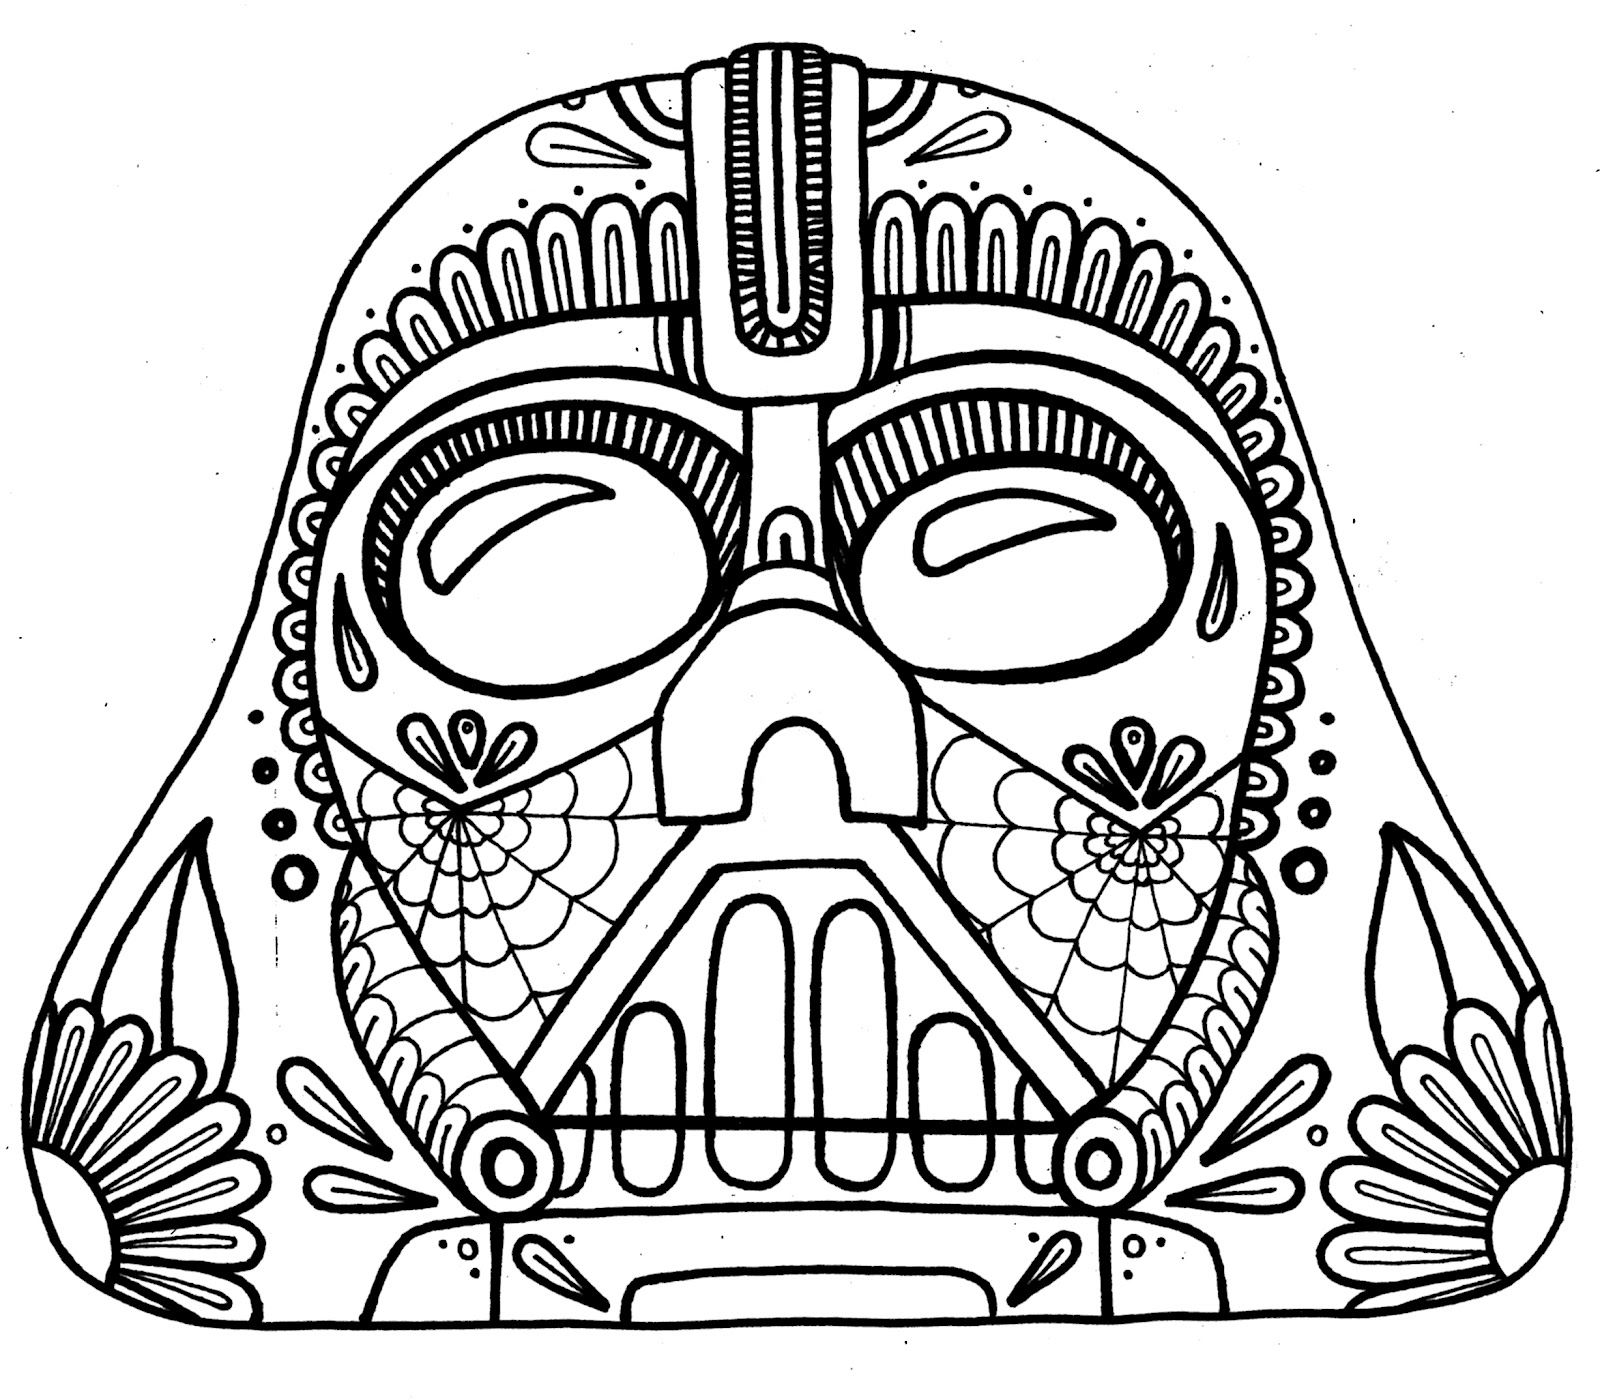 Vader Coloring Pages